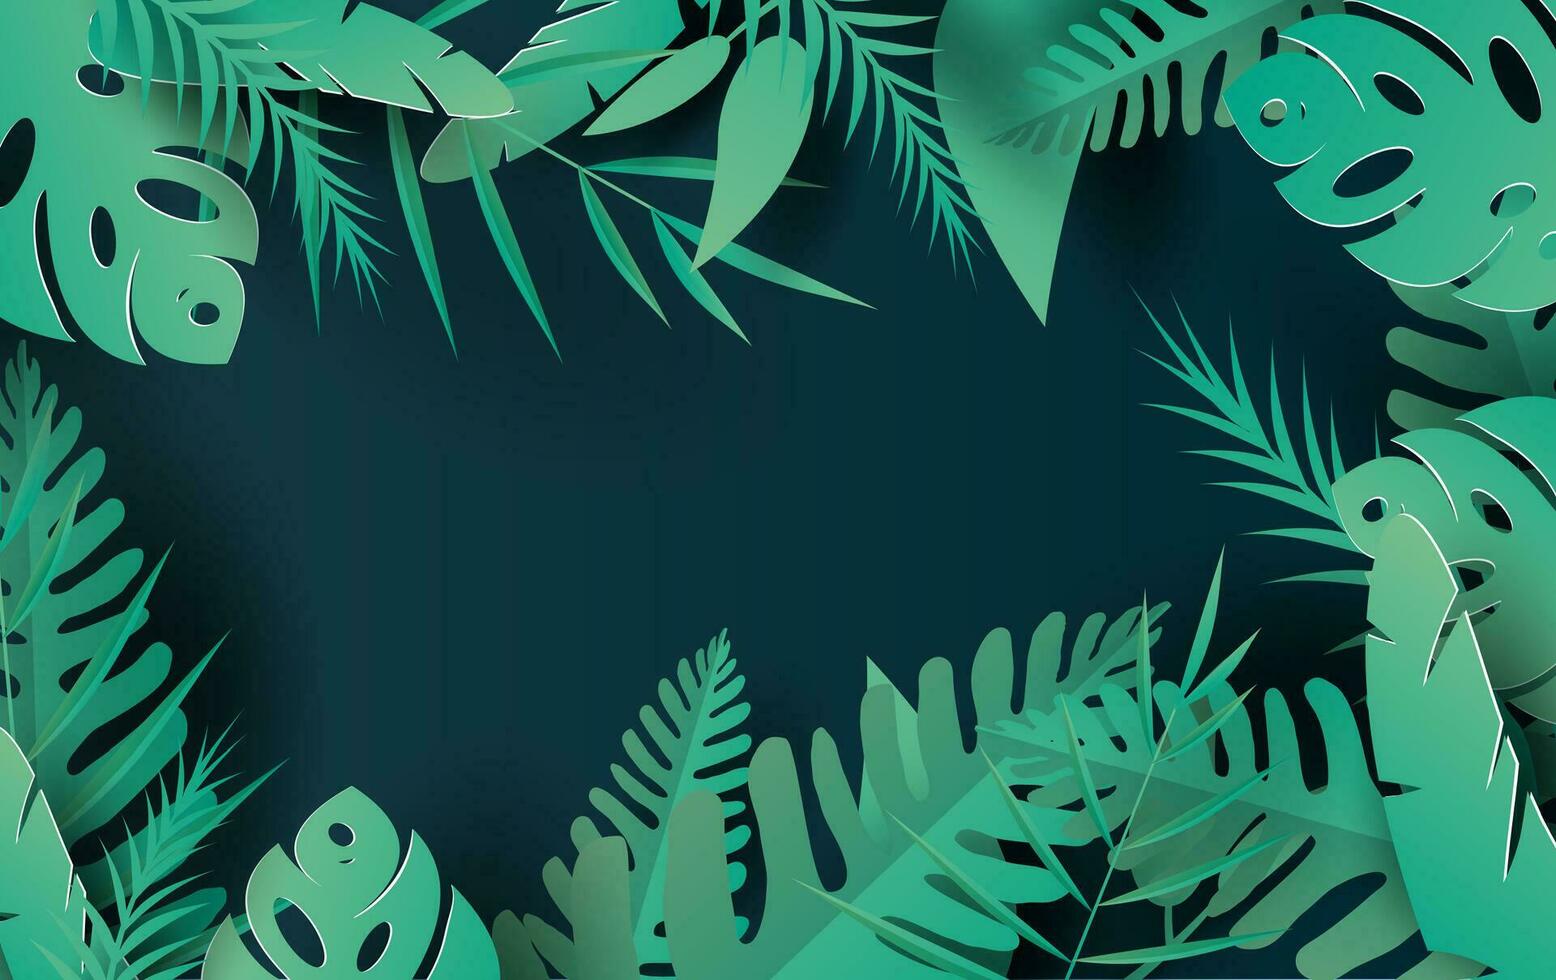 3D illustration of Tropical palm leaves and nature plants.Design Paper cut and craft Origami Hawaiian style summertime space for text. Graphic dark green summer season floral background.vector. EPS10 vector